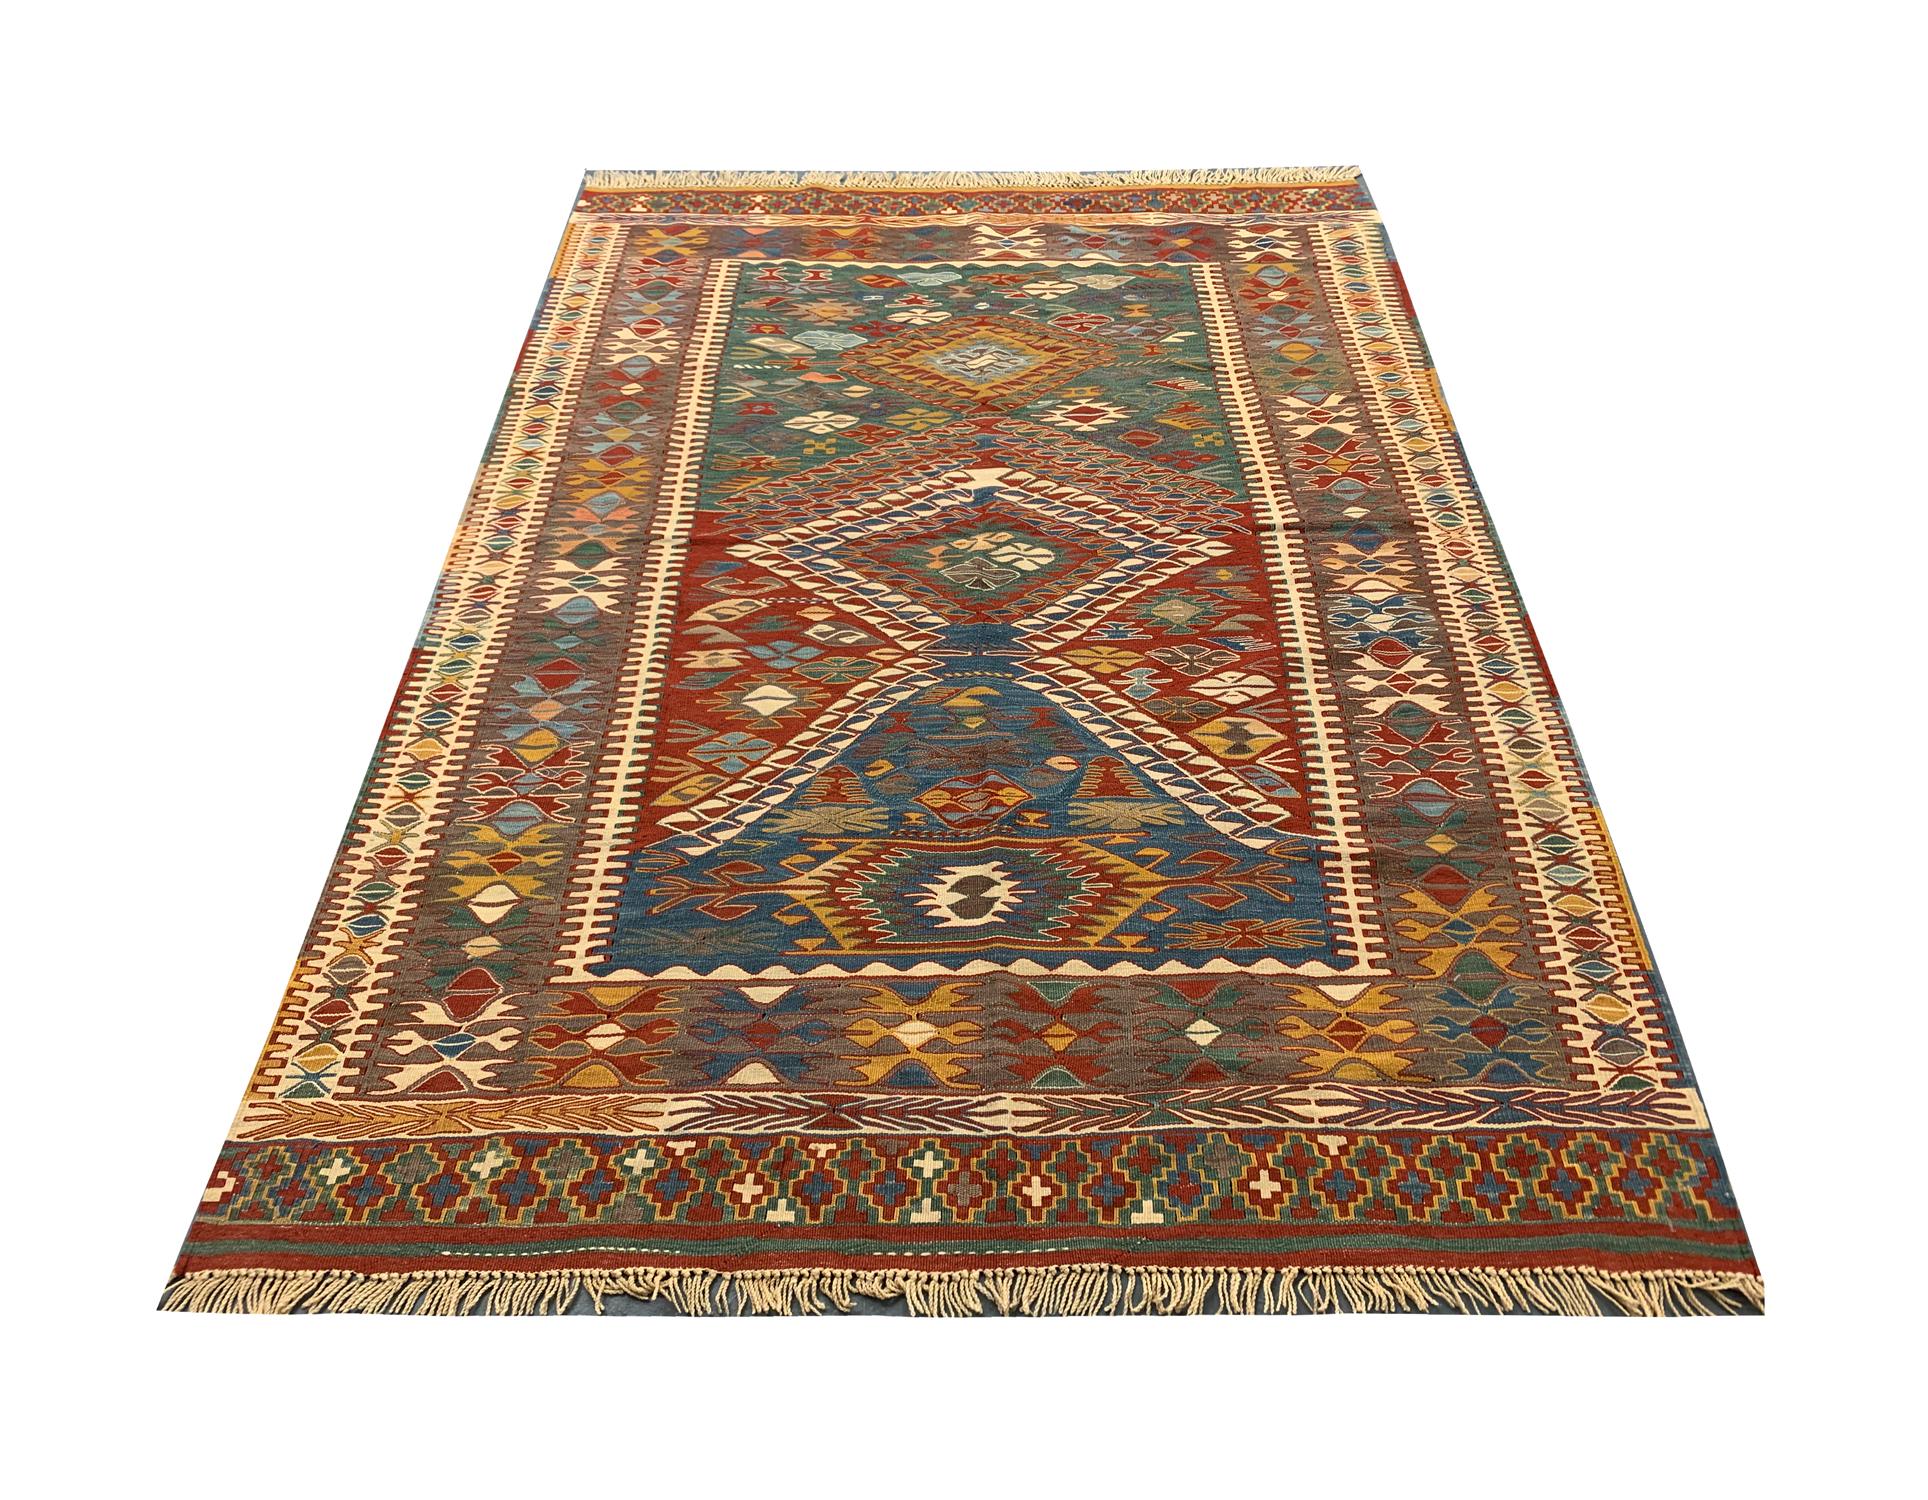 This elegant handwoven kilim rug is a vintage Turkish rug woven in the 1980s. The design features a tribal design with diamonds and medallions woven throughout with red, blue, green, and yellow accents. A repeat pattern border has then framed this.